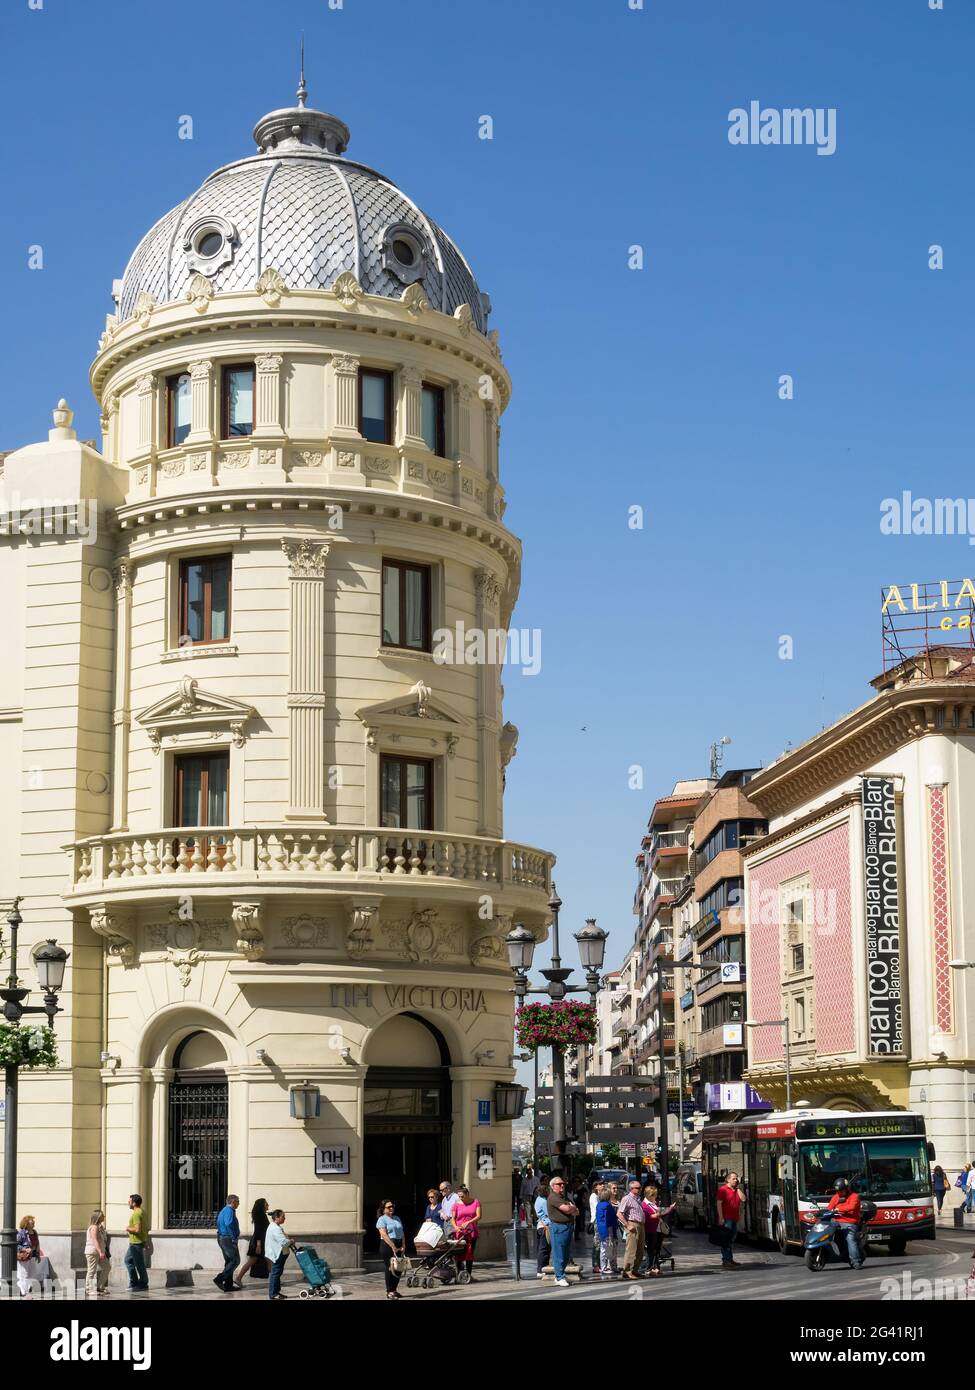 GRANADA, ANDALUCIA/SPAIN - MAY 7 : Victoria Hotel in Granada Spain on May 7, 2014. Unidentified people. Stock Photo